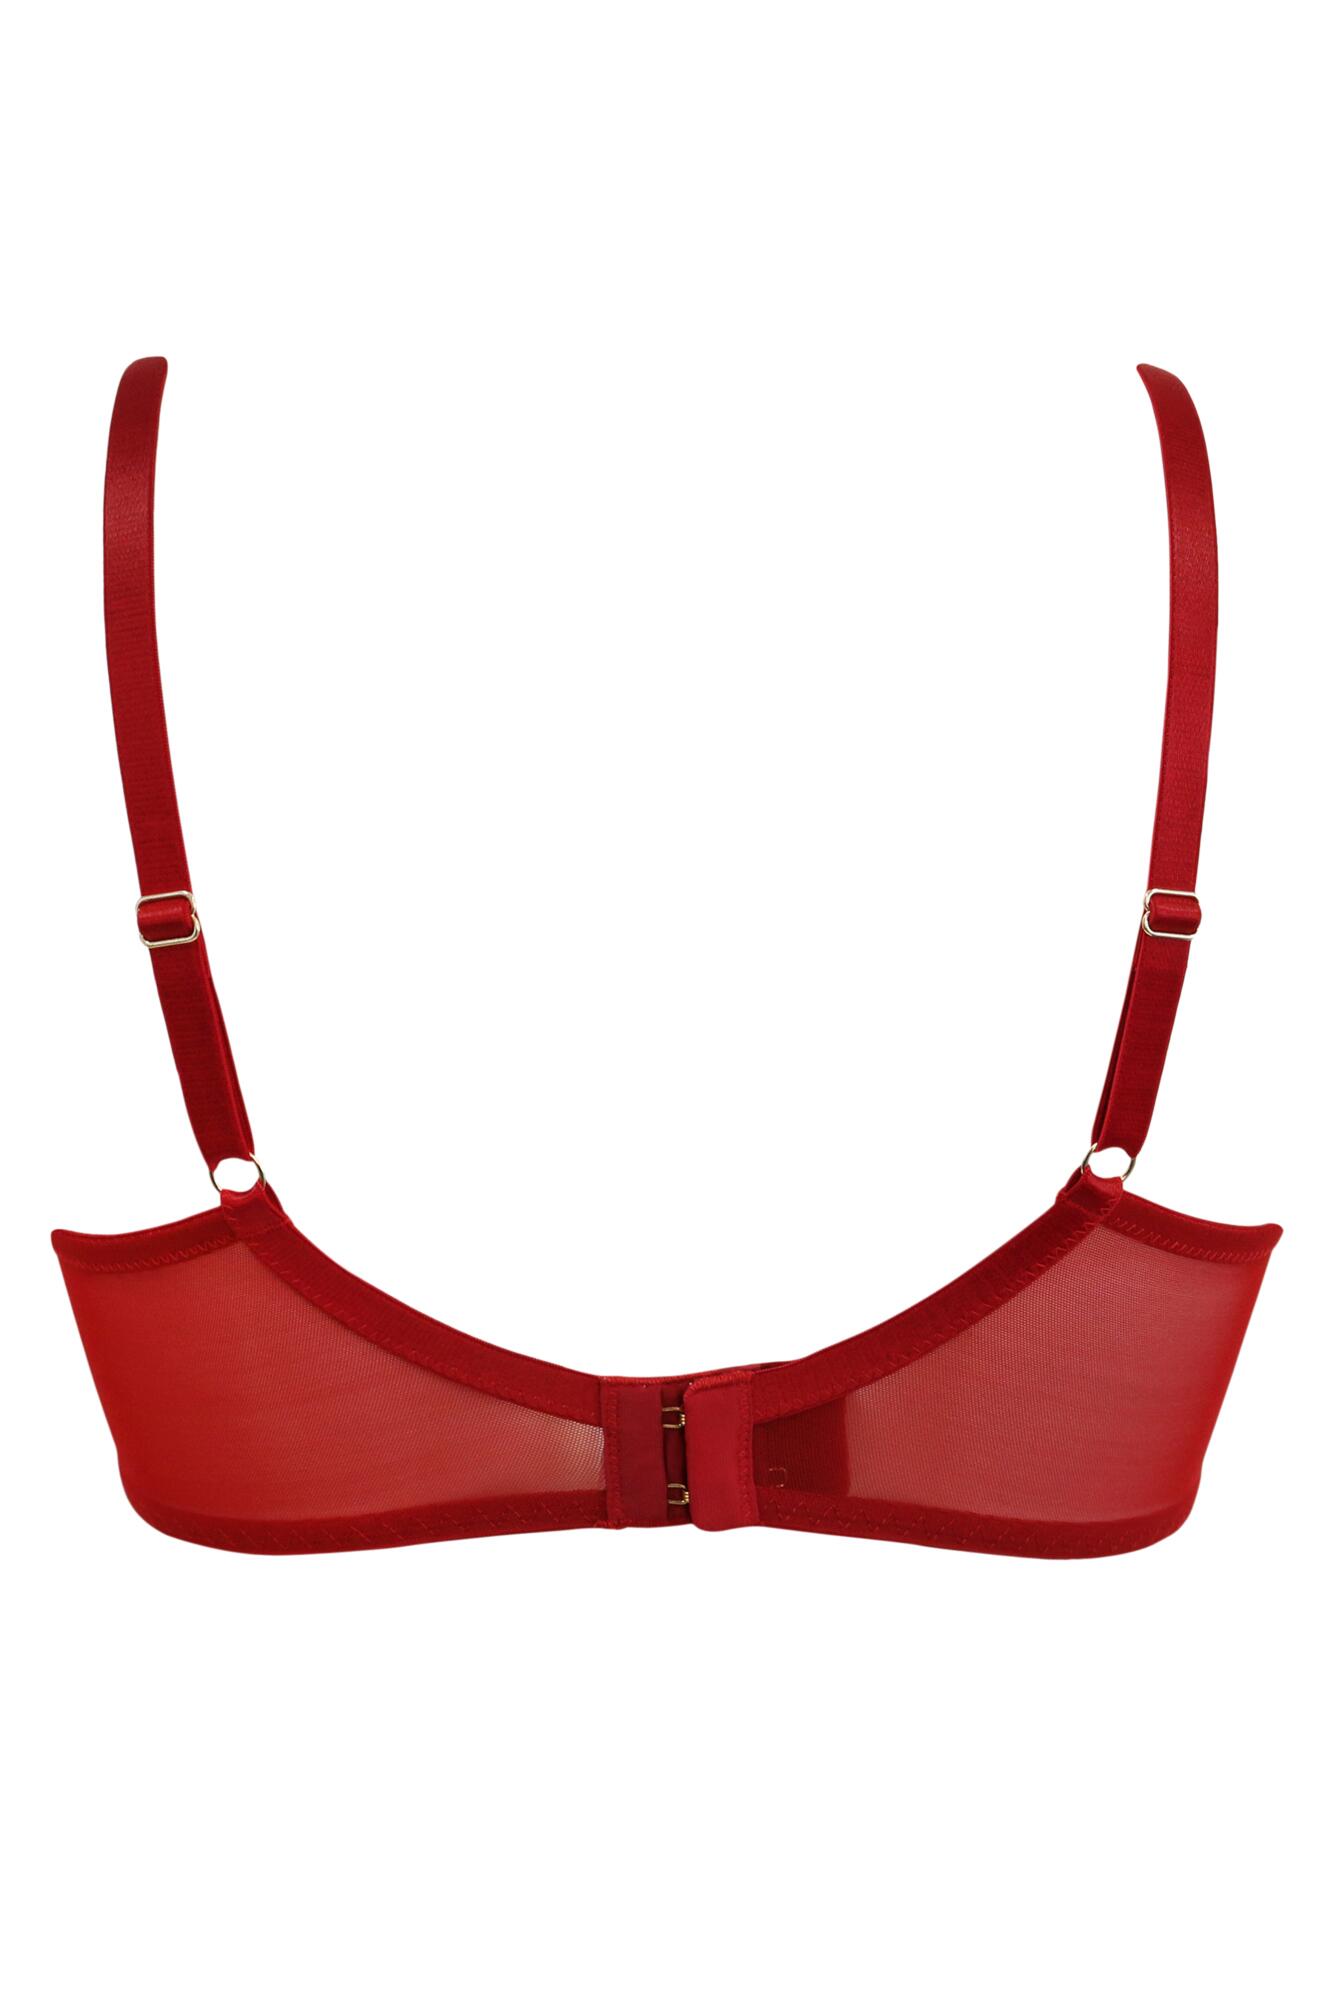 Statement Underwired Bra in Red | Pour Moi